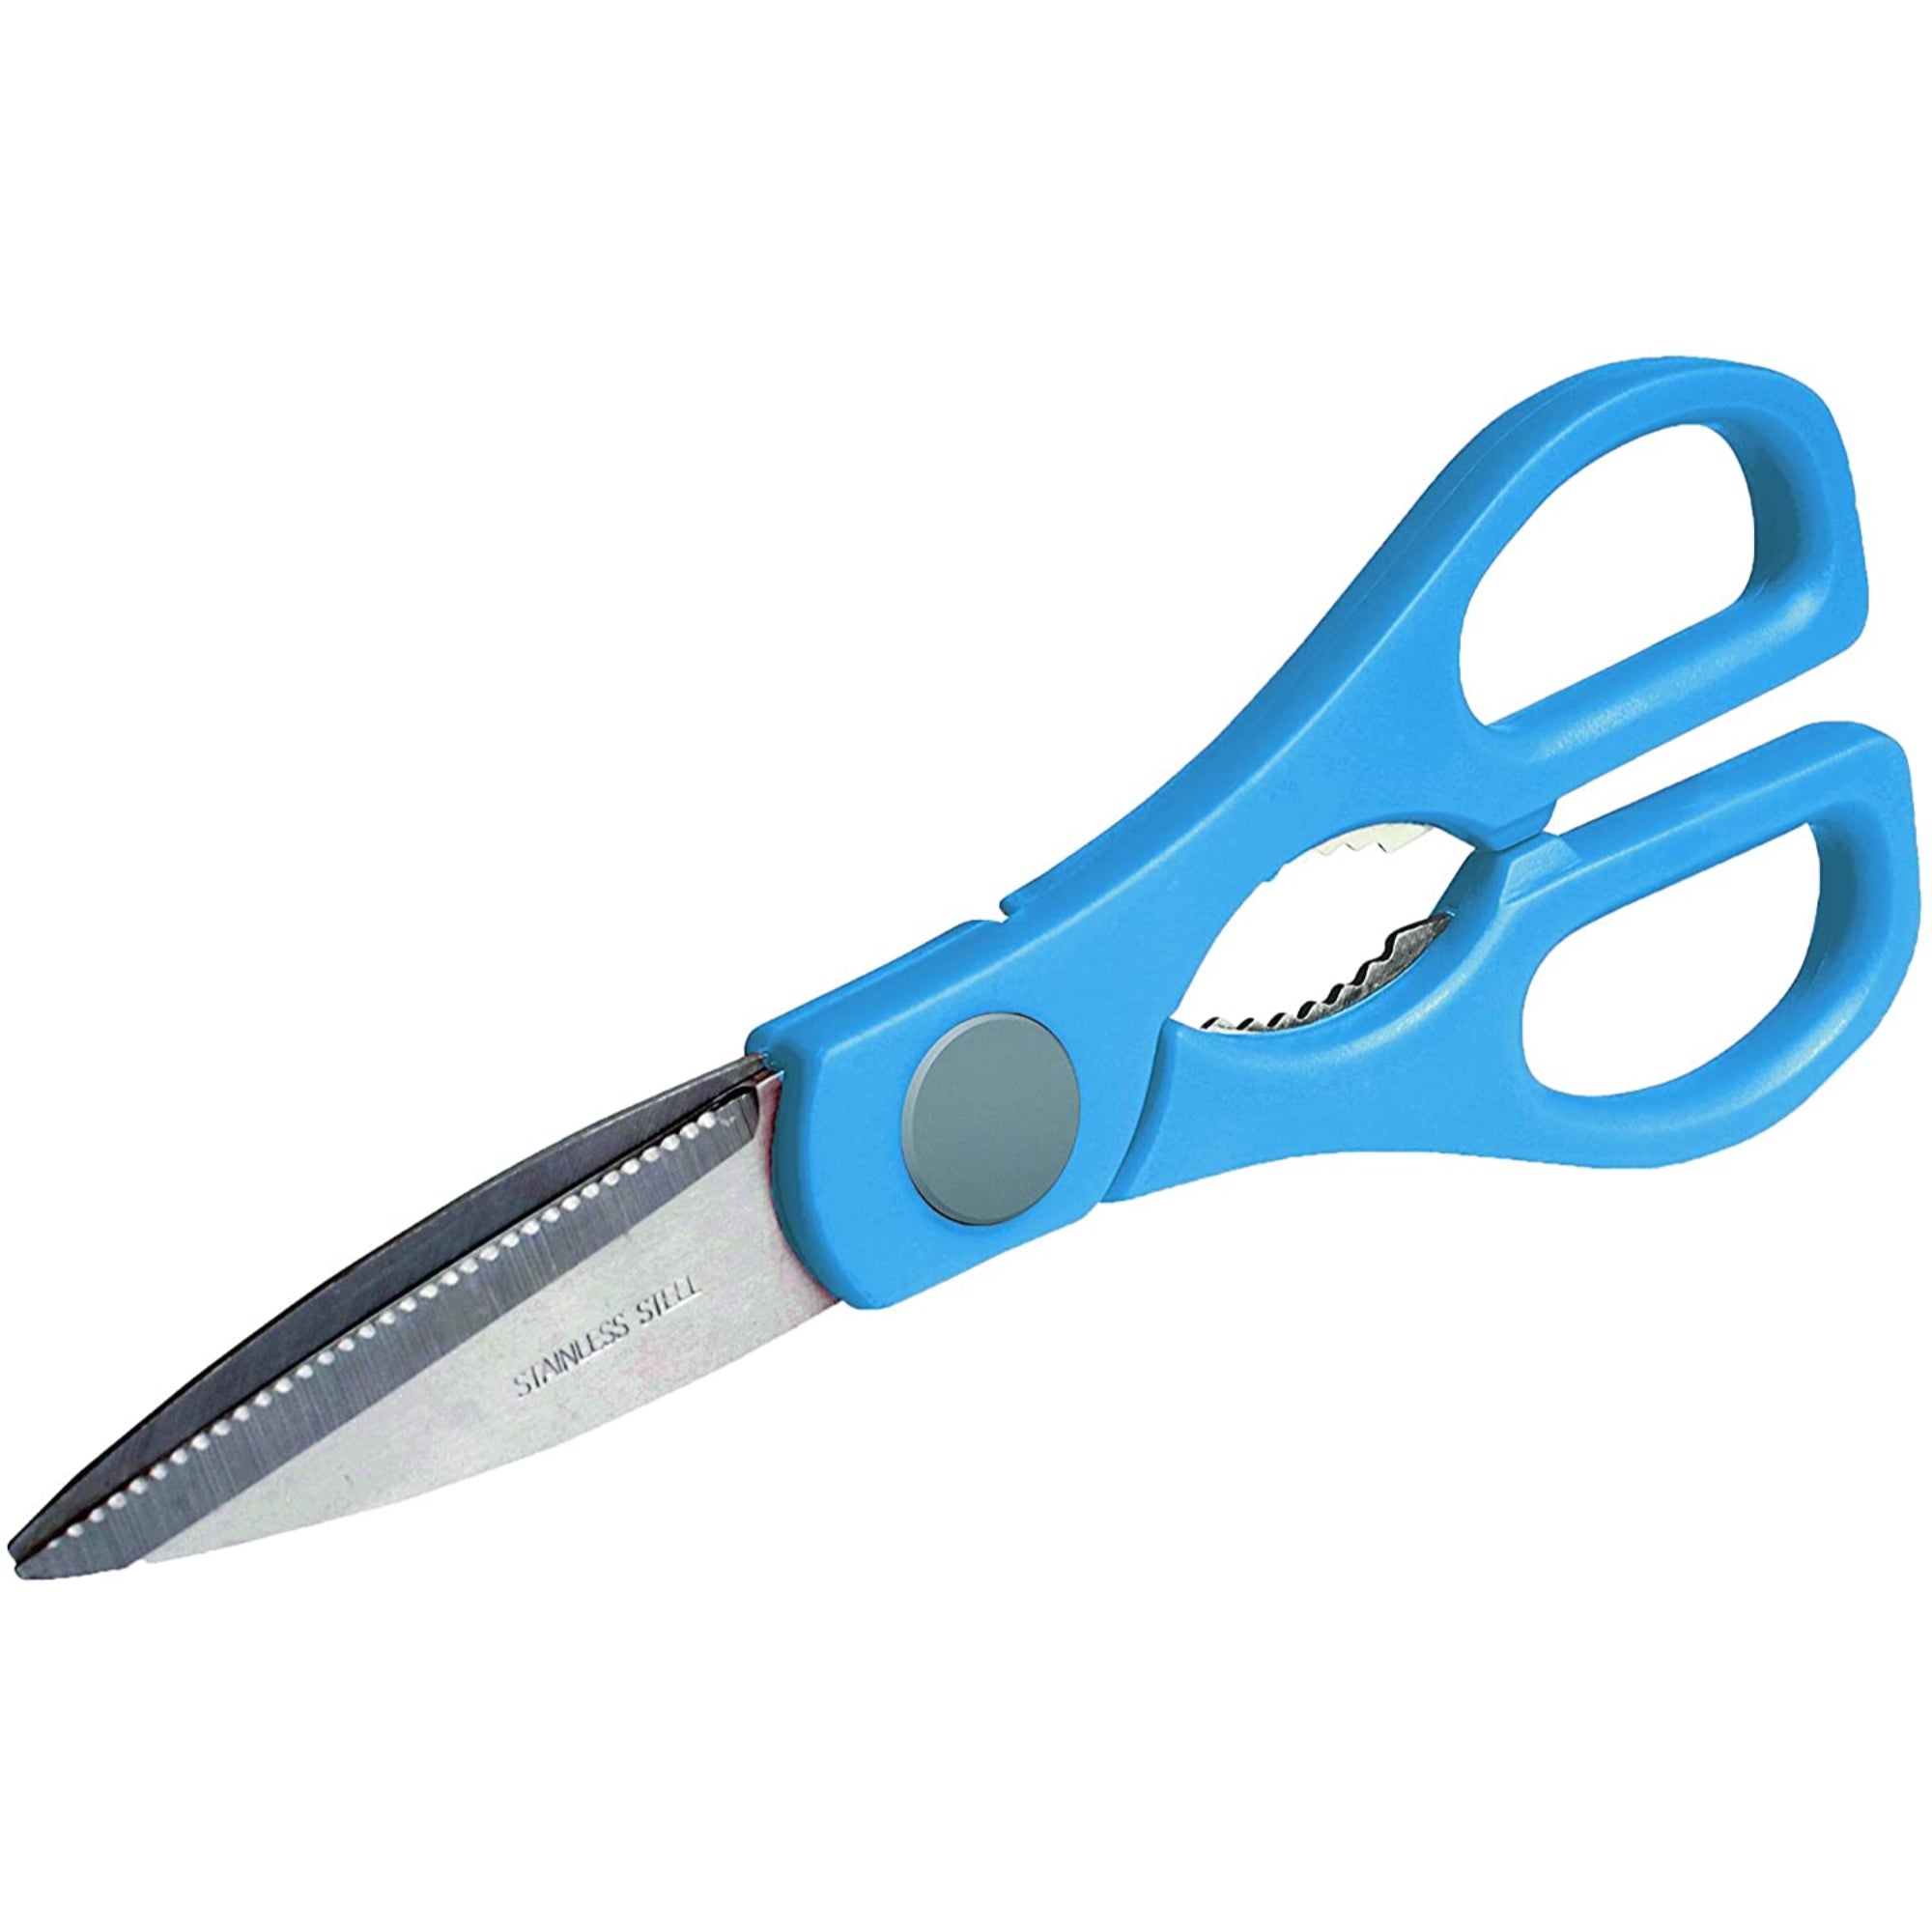 Bloom Household Stainless Steel Blades Shears (Six Count, Assorted Colors)